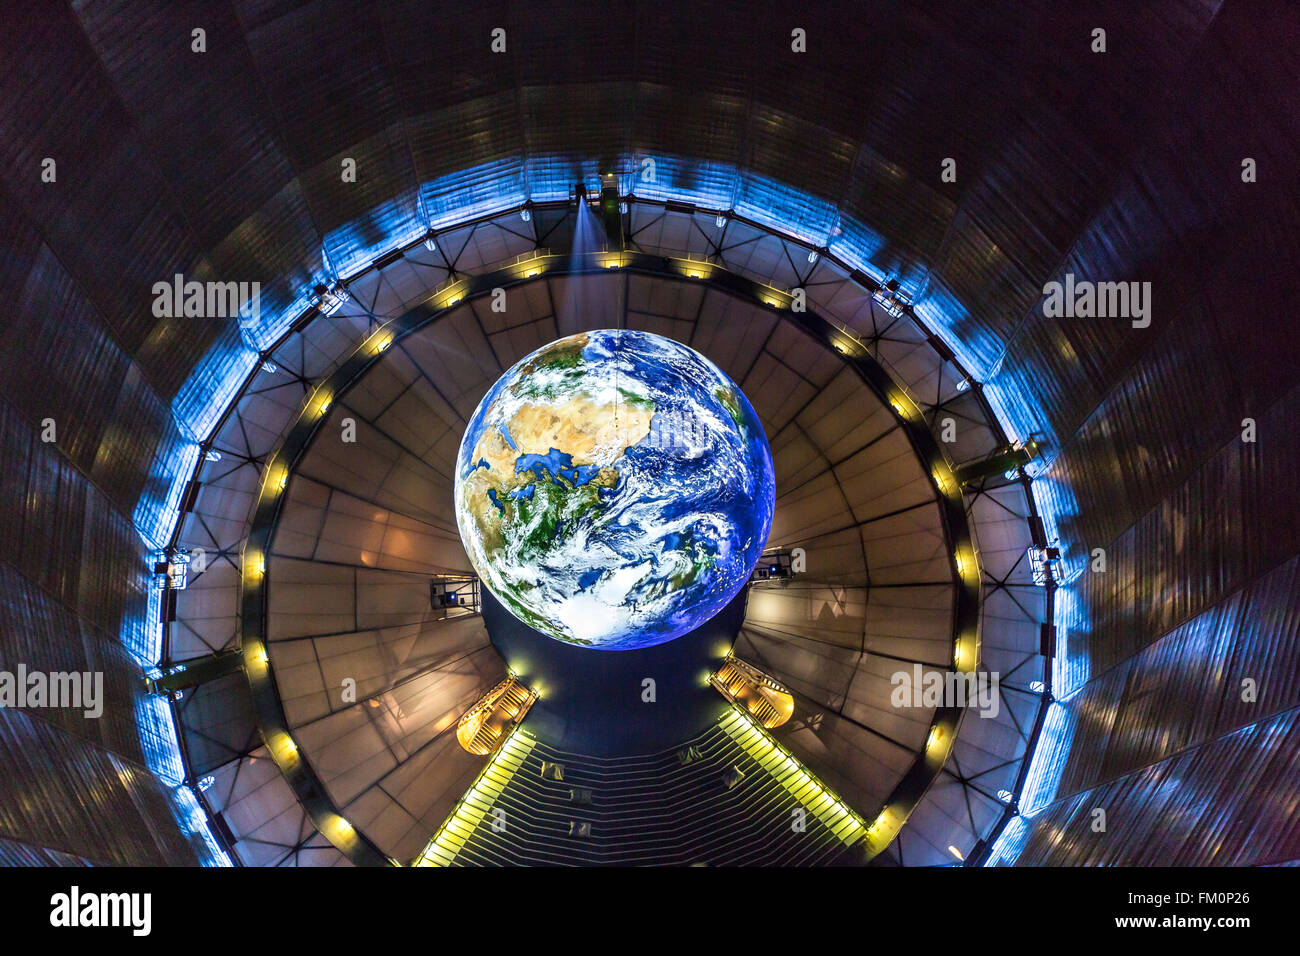 The Gasometer in Oberhausen, Germany, Europe's highest exhibition hall, 117 Meter hight, new exhibition, Wonders of Nature, Stock Photo